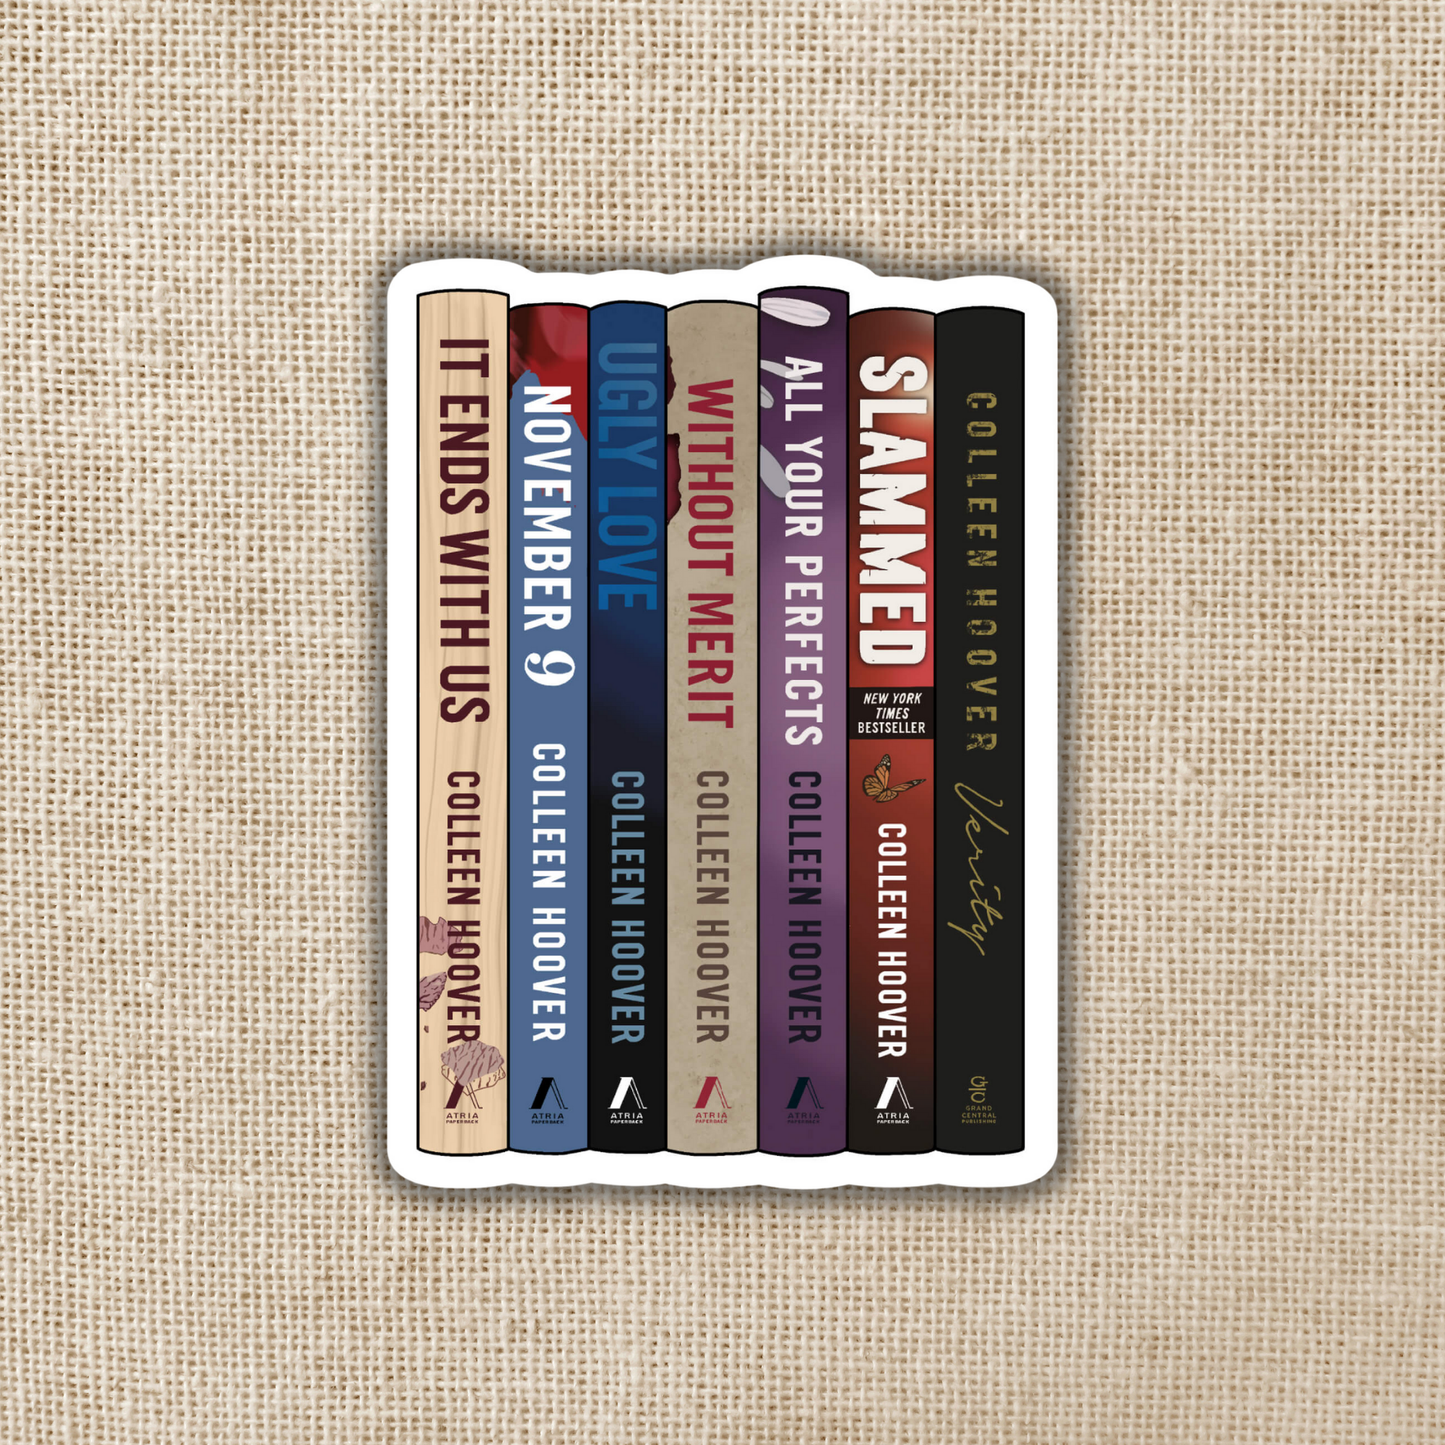 Wildly Enough - Colleen Hoover Bestsellers Book Stack Sticker